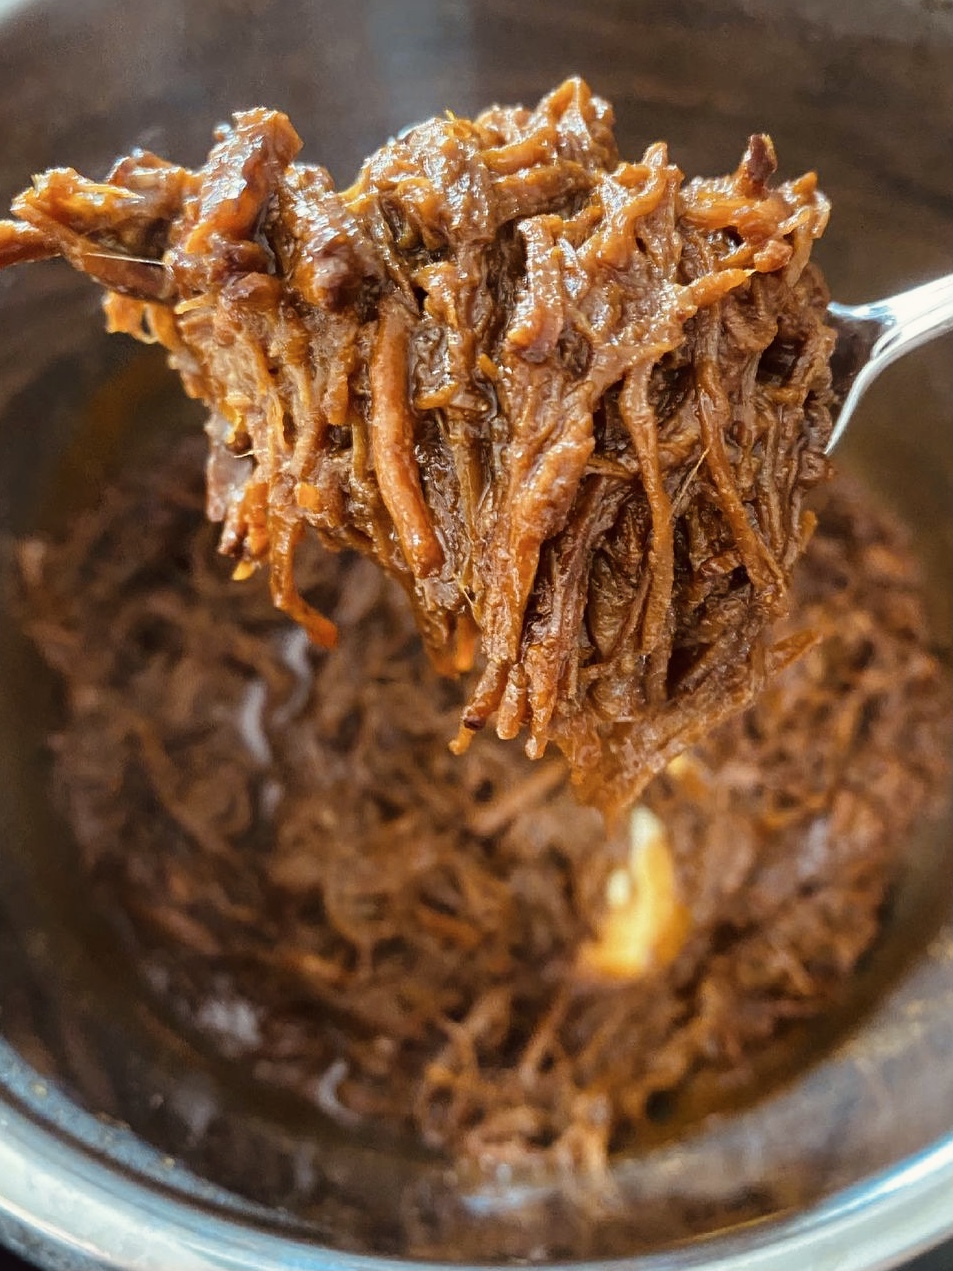 Cooked, tender beef brisket in a rich sauce.